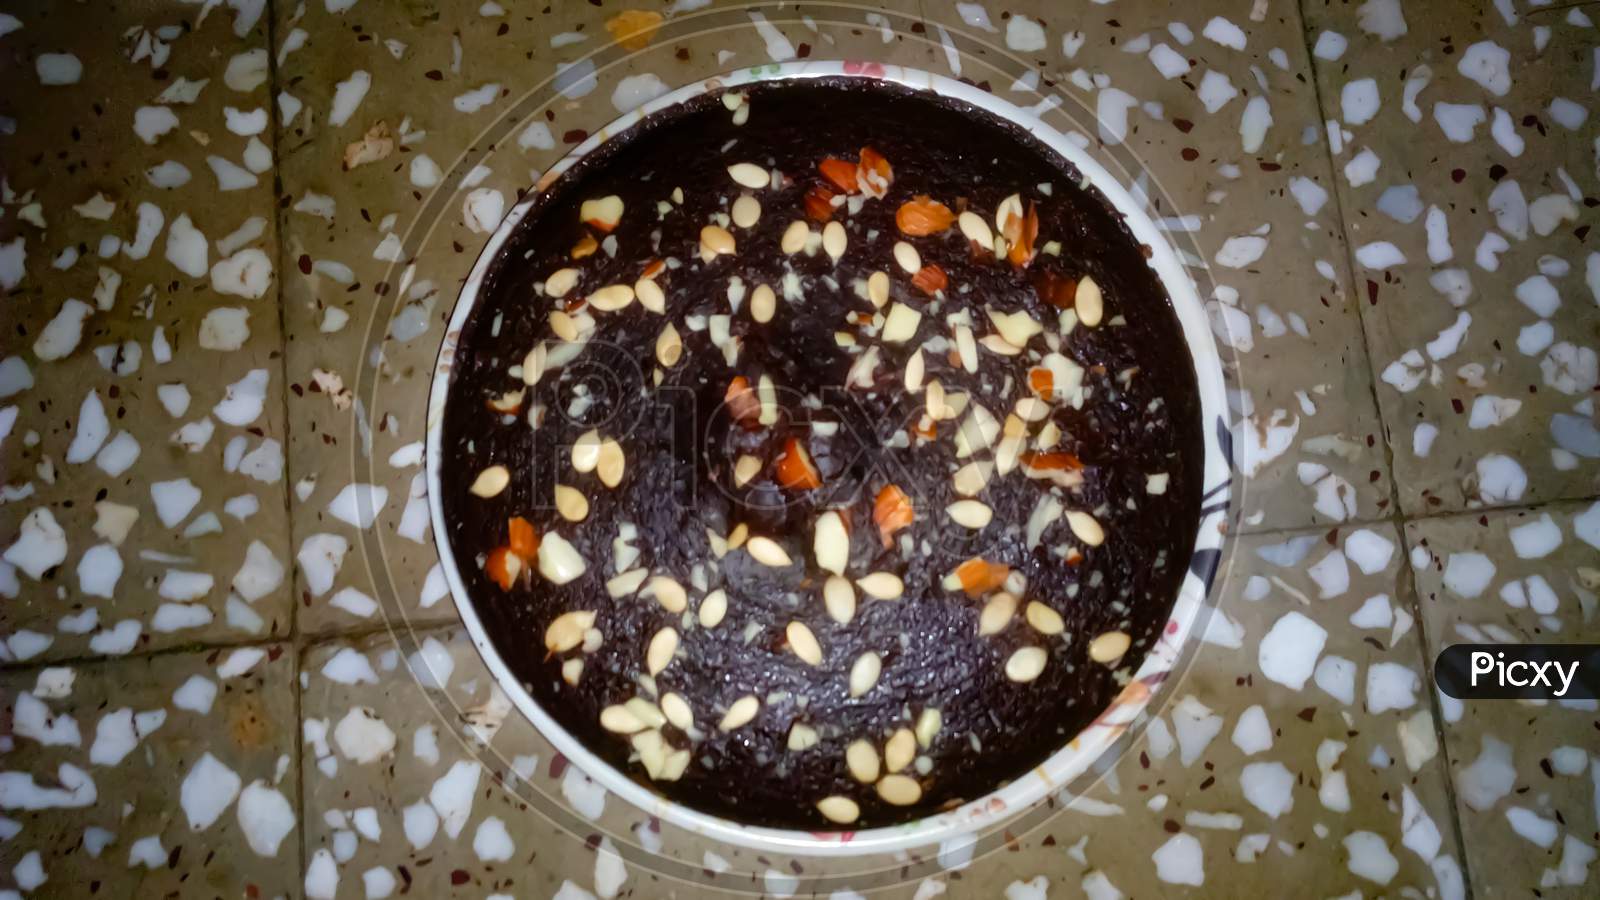 Top view of Birthday cake with nuts